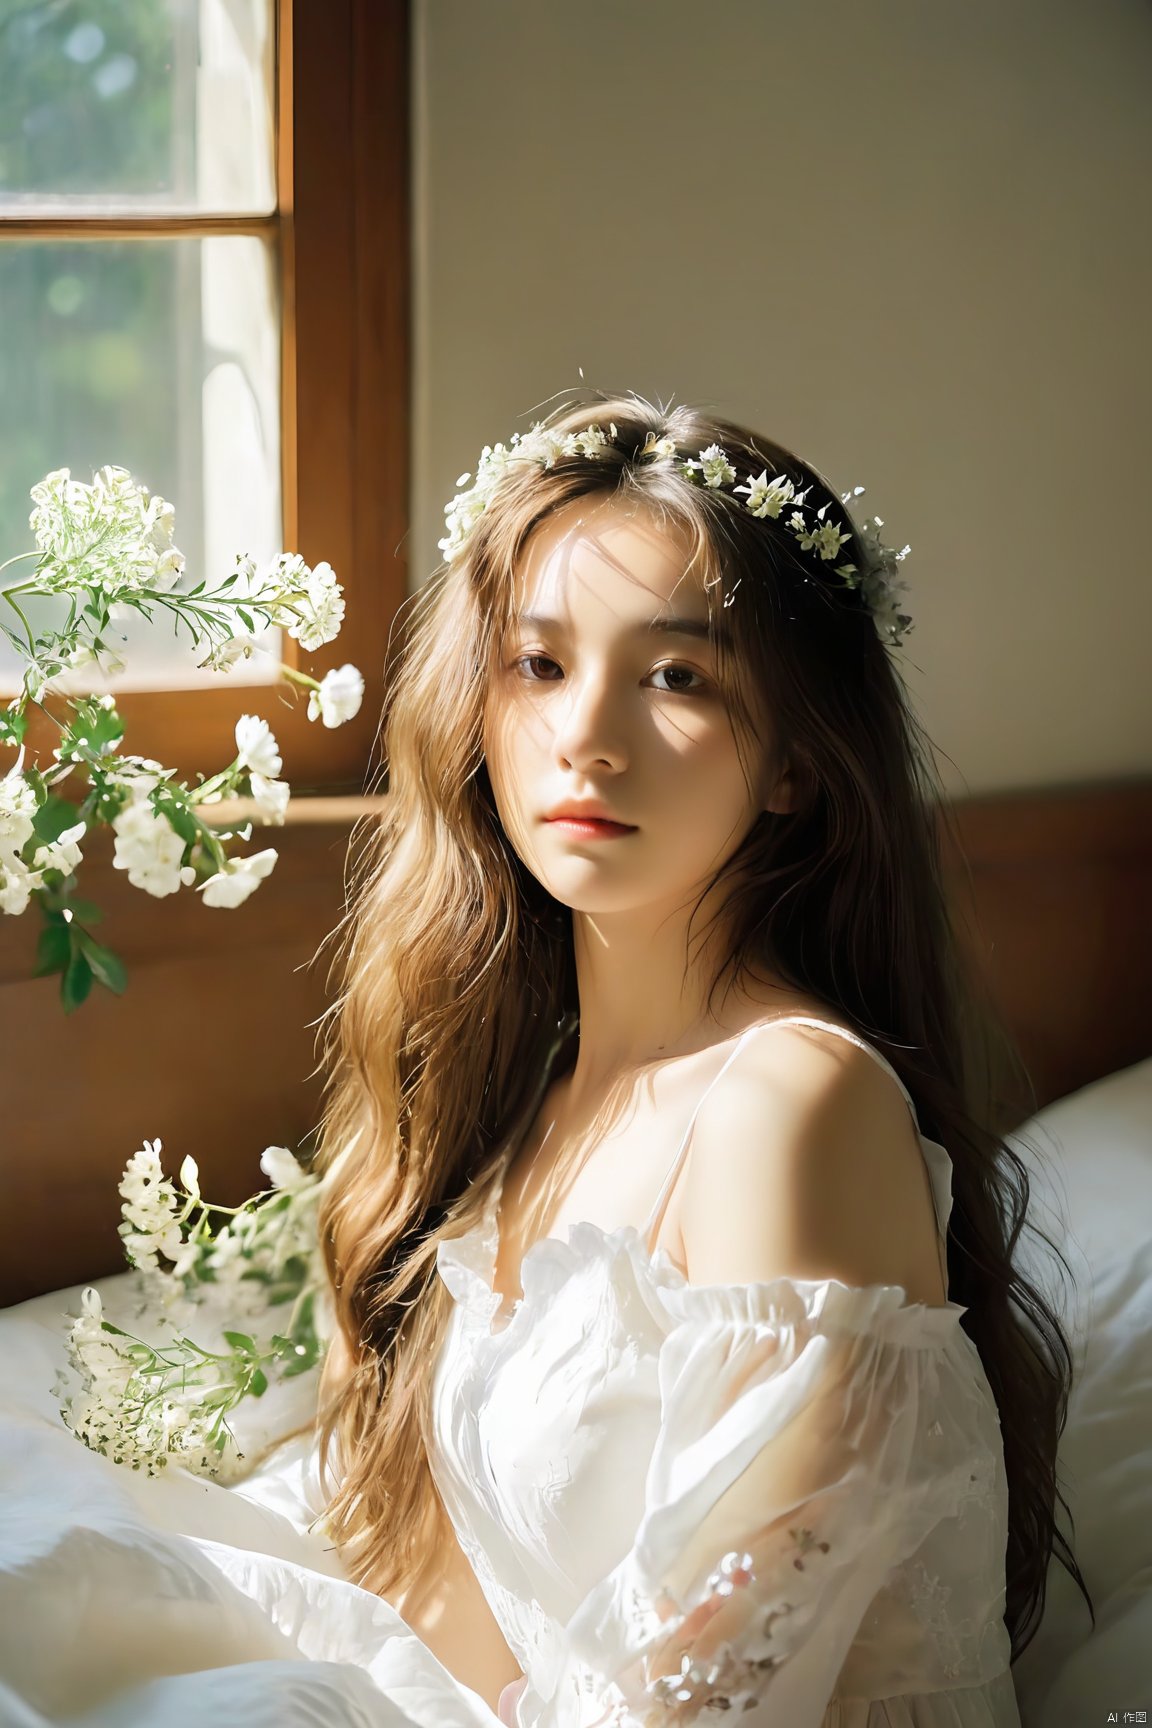 xxmixgirl,white dress,long hair,a girl,lie in bed,sunlight shining on hair,the window is covered in flowers,outside the window is nature,facing the camera,there are flowers on the hair,